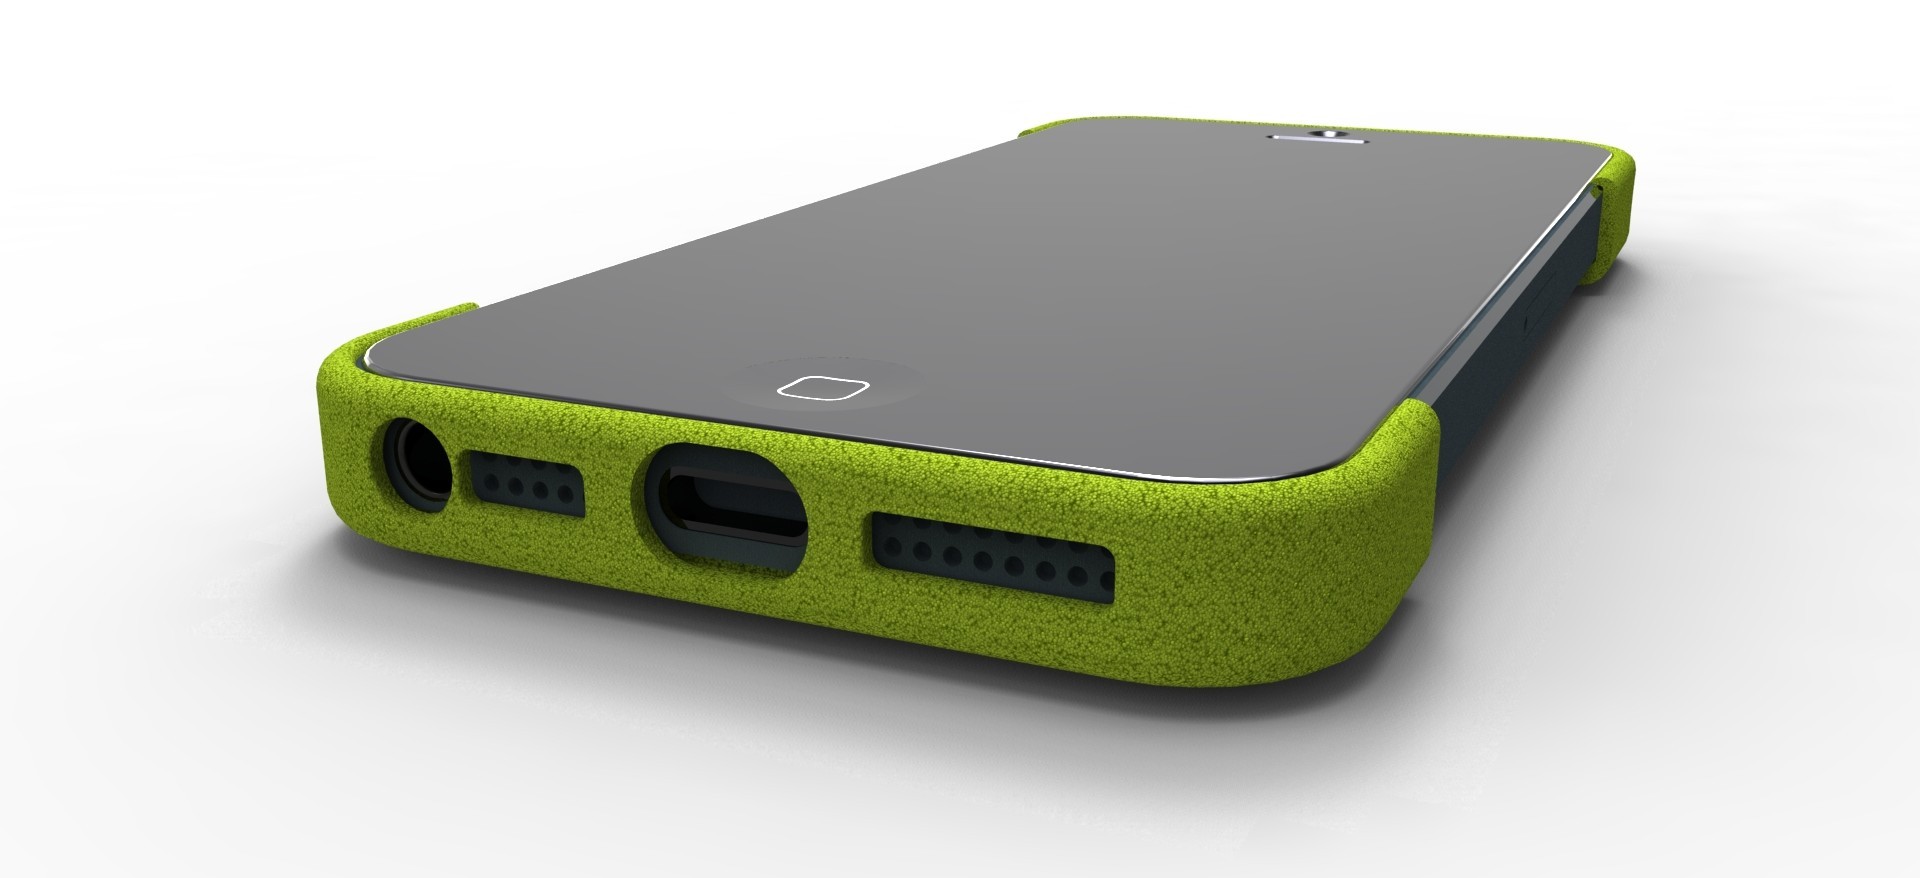 Exclusive Gallery of iPhone 5 3D Printed Cases: Get Yours Today on 3DPcase